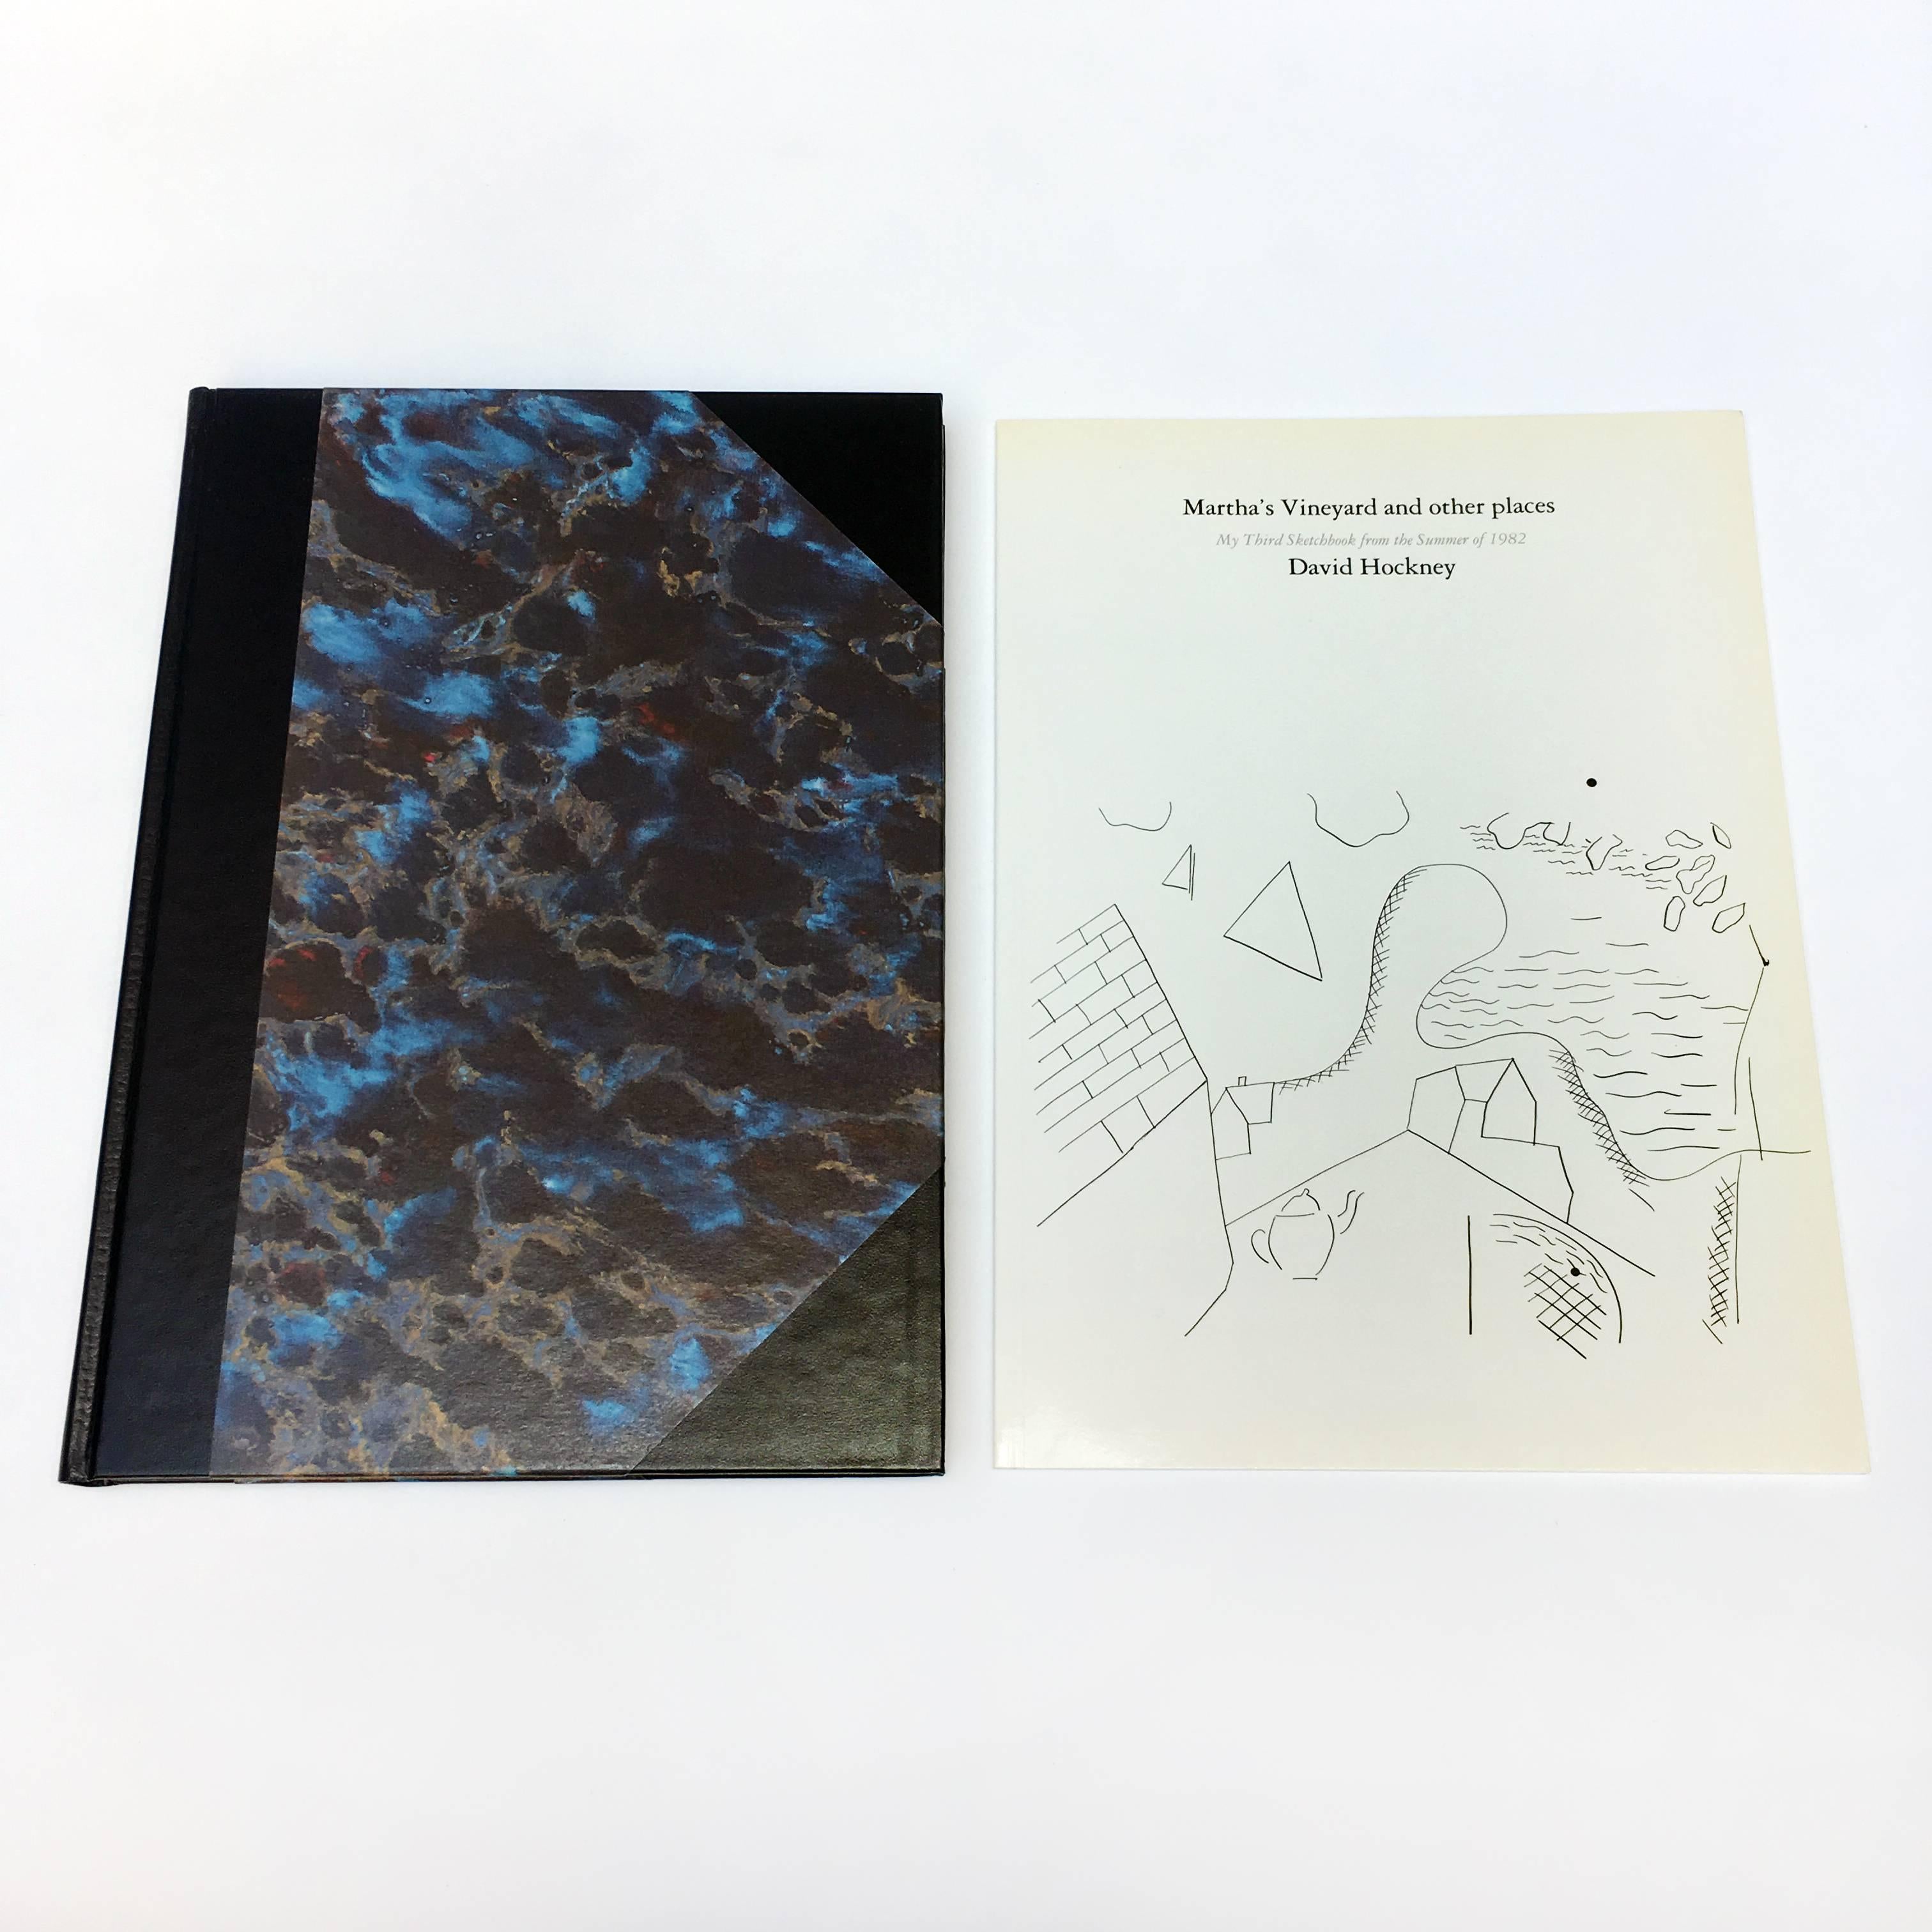 First edition, published by Harry N. Abrams 

‘My Third Sketchbook from the Summer of 1982’

This beautiful marbled hardcover book is a direct facsimile of one of David Hockney’s sketchbooks, part of the celebrated Abrams series of sketchbook